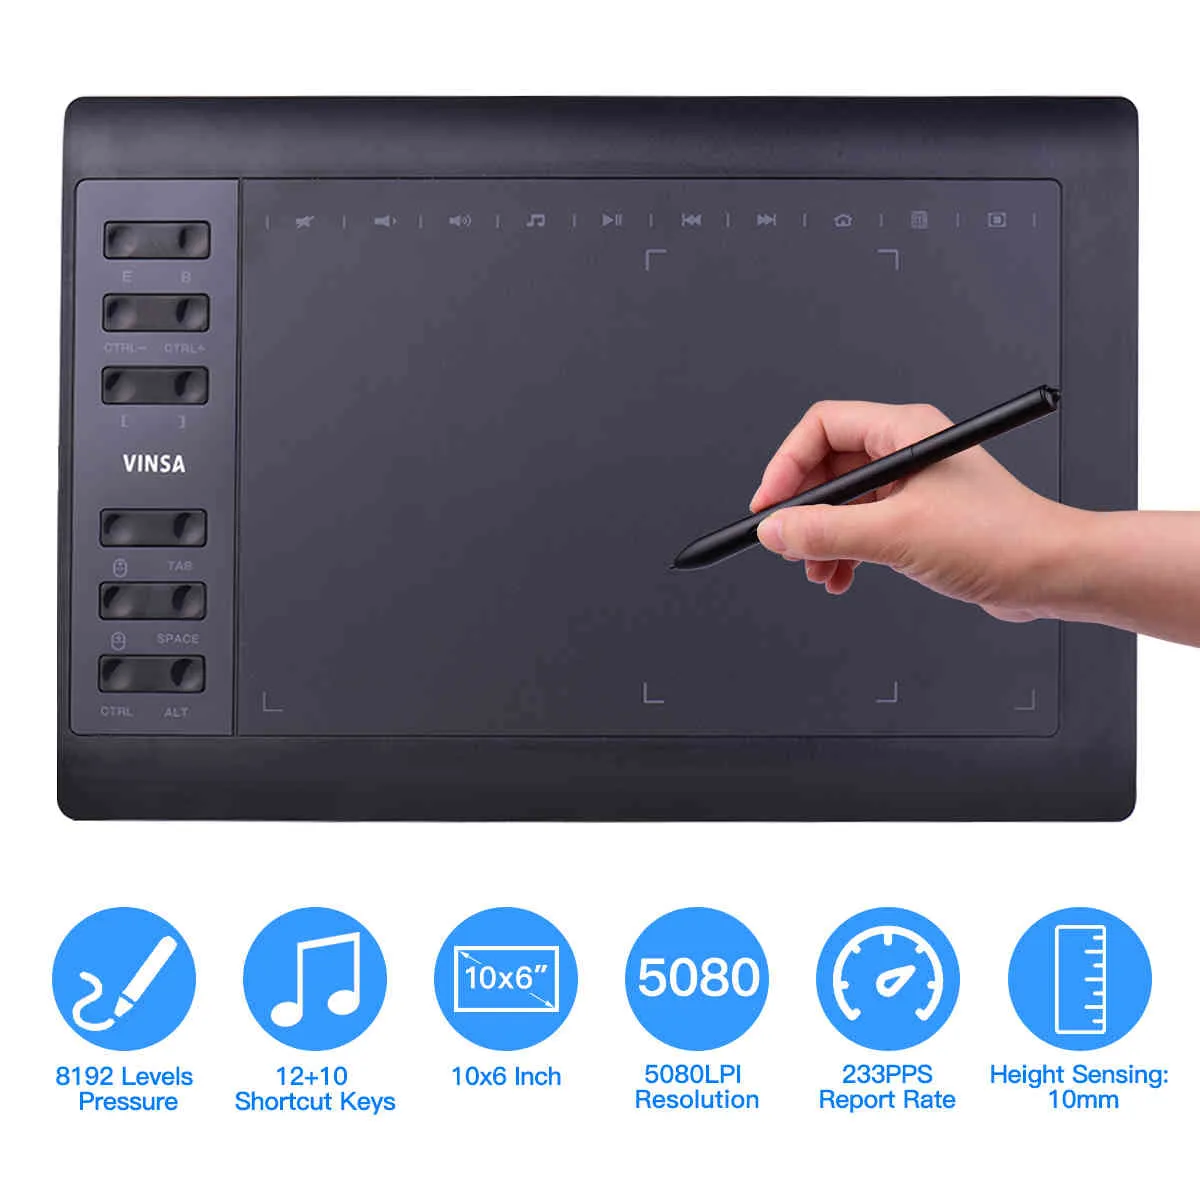 10x6" Professional Graphics Drawing Tablet 12 Express Keys 8192 Levels Battery-Free Stylus/Nibs/Pen Clip Support PC/Laptop